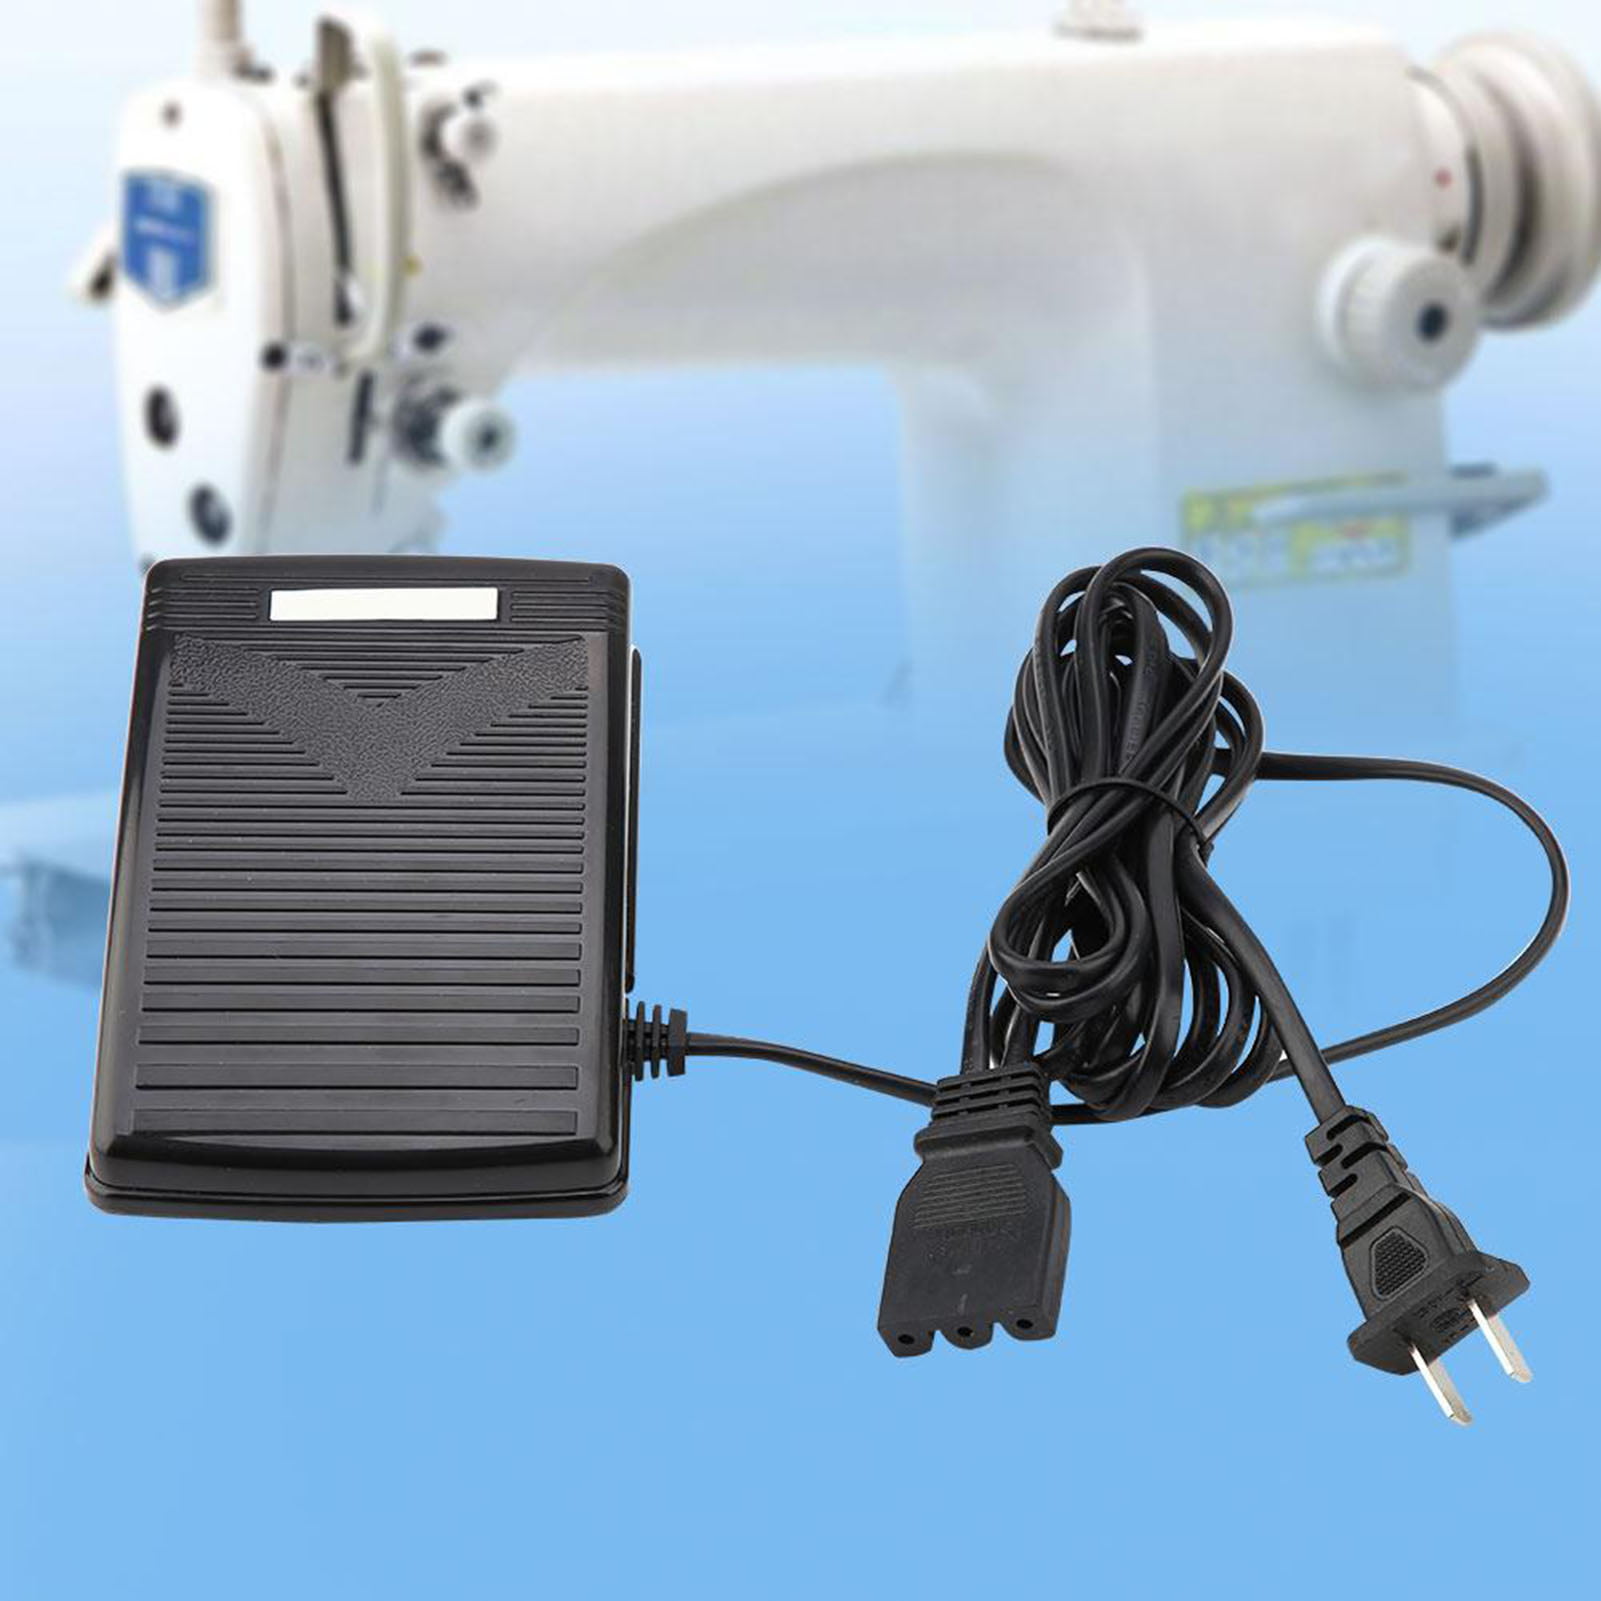 NEW ELECTRONIC FOOT CONTROLLER 2 WIRE FOR SEWING MACHINES